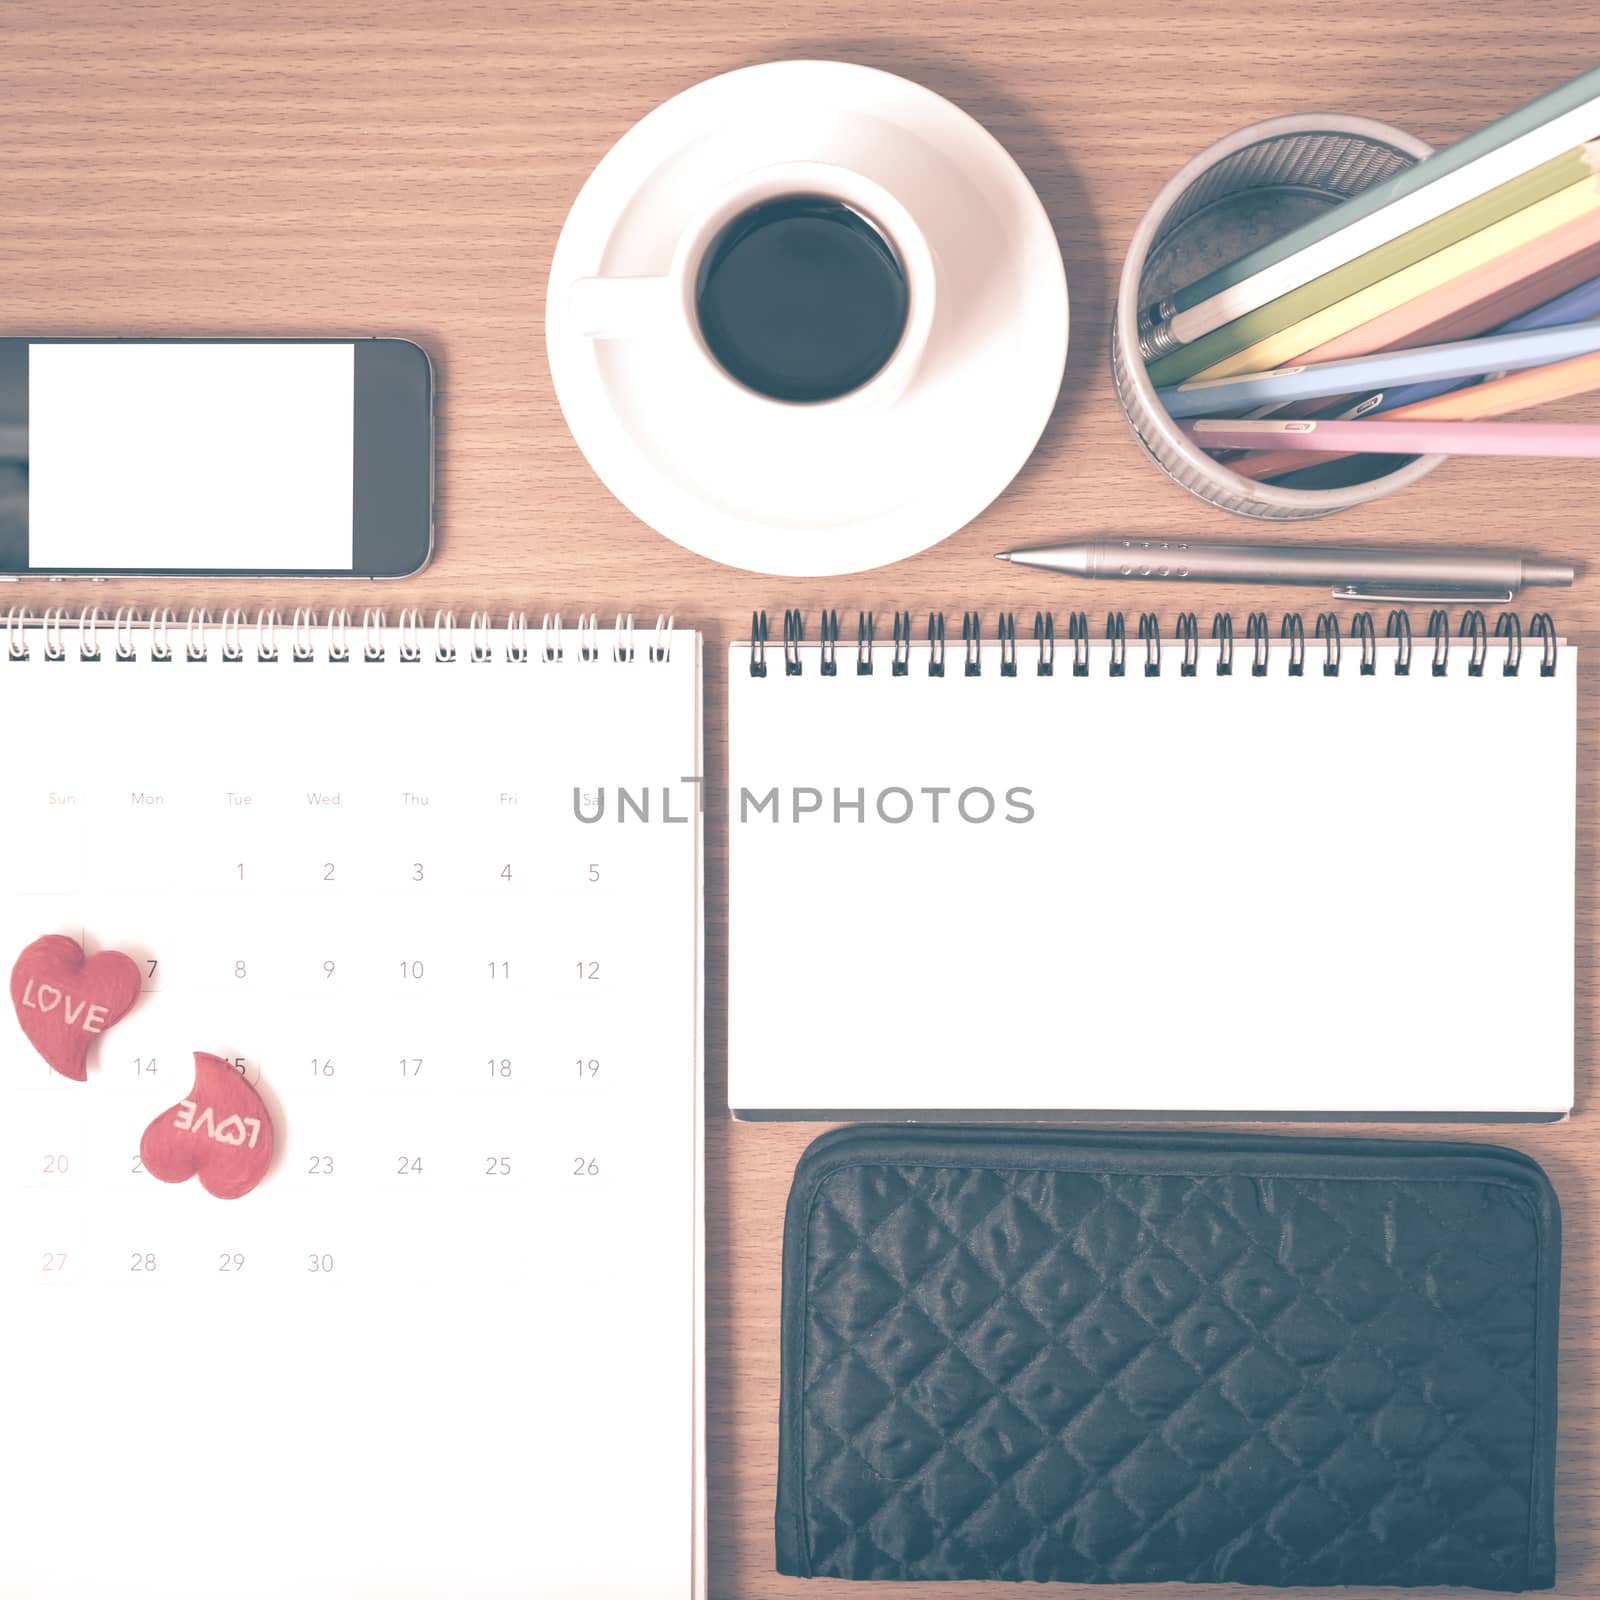 office desk : coffee with phone,wallet,calendar,heart,color penc by ammza12